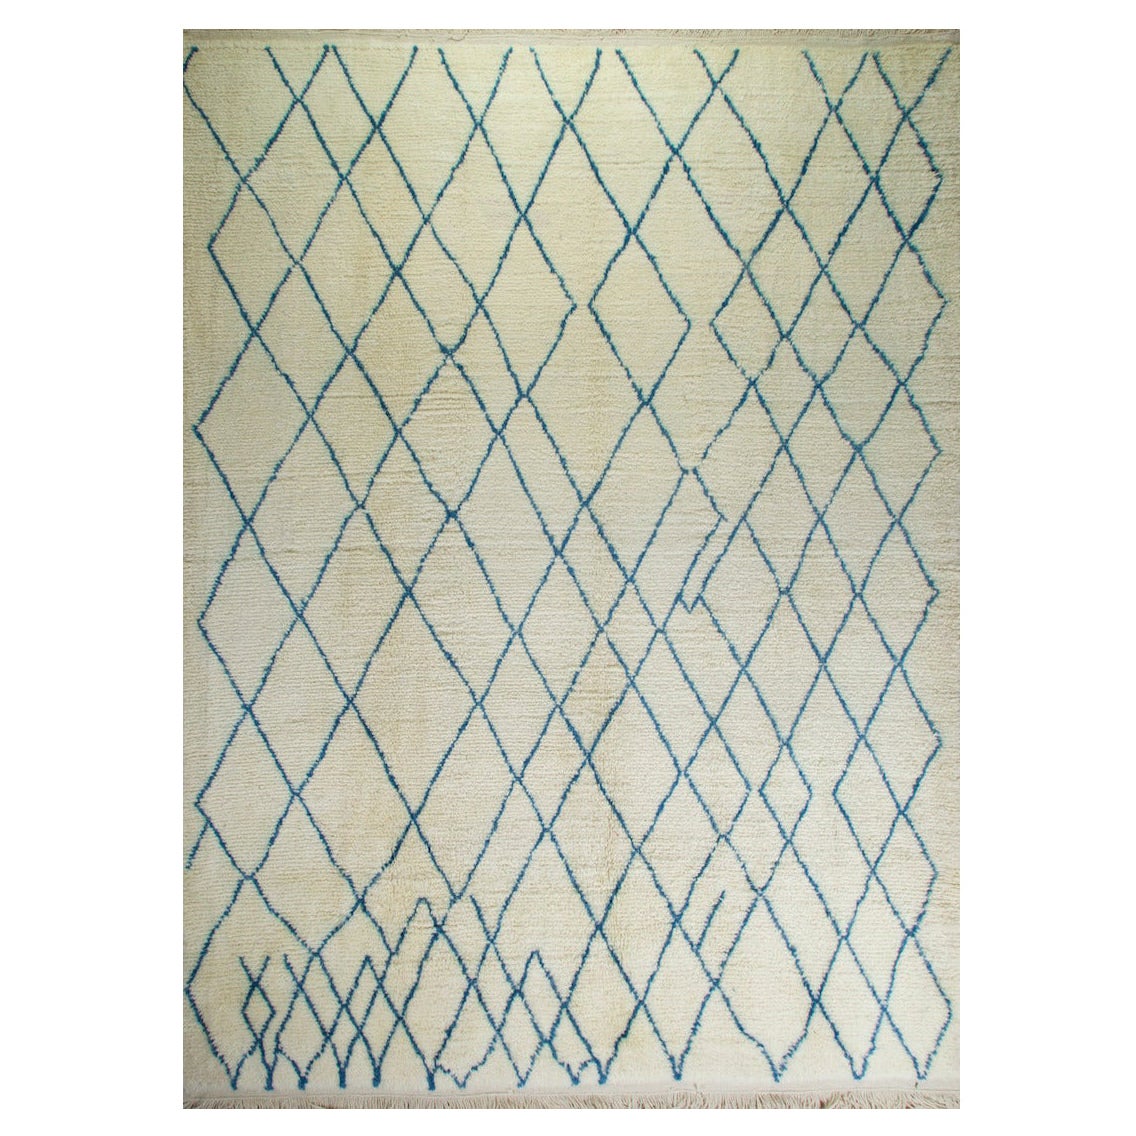 9x12 Ft Moroccan Rug. 100% Wool. Ivory & Blue Colors, Custom Options Available For Sale